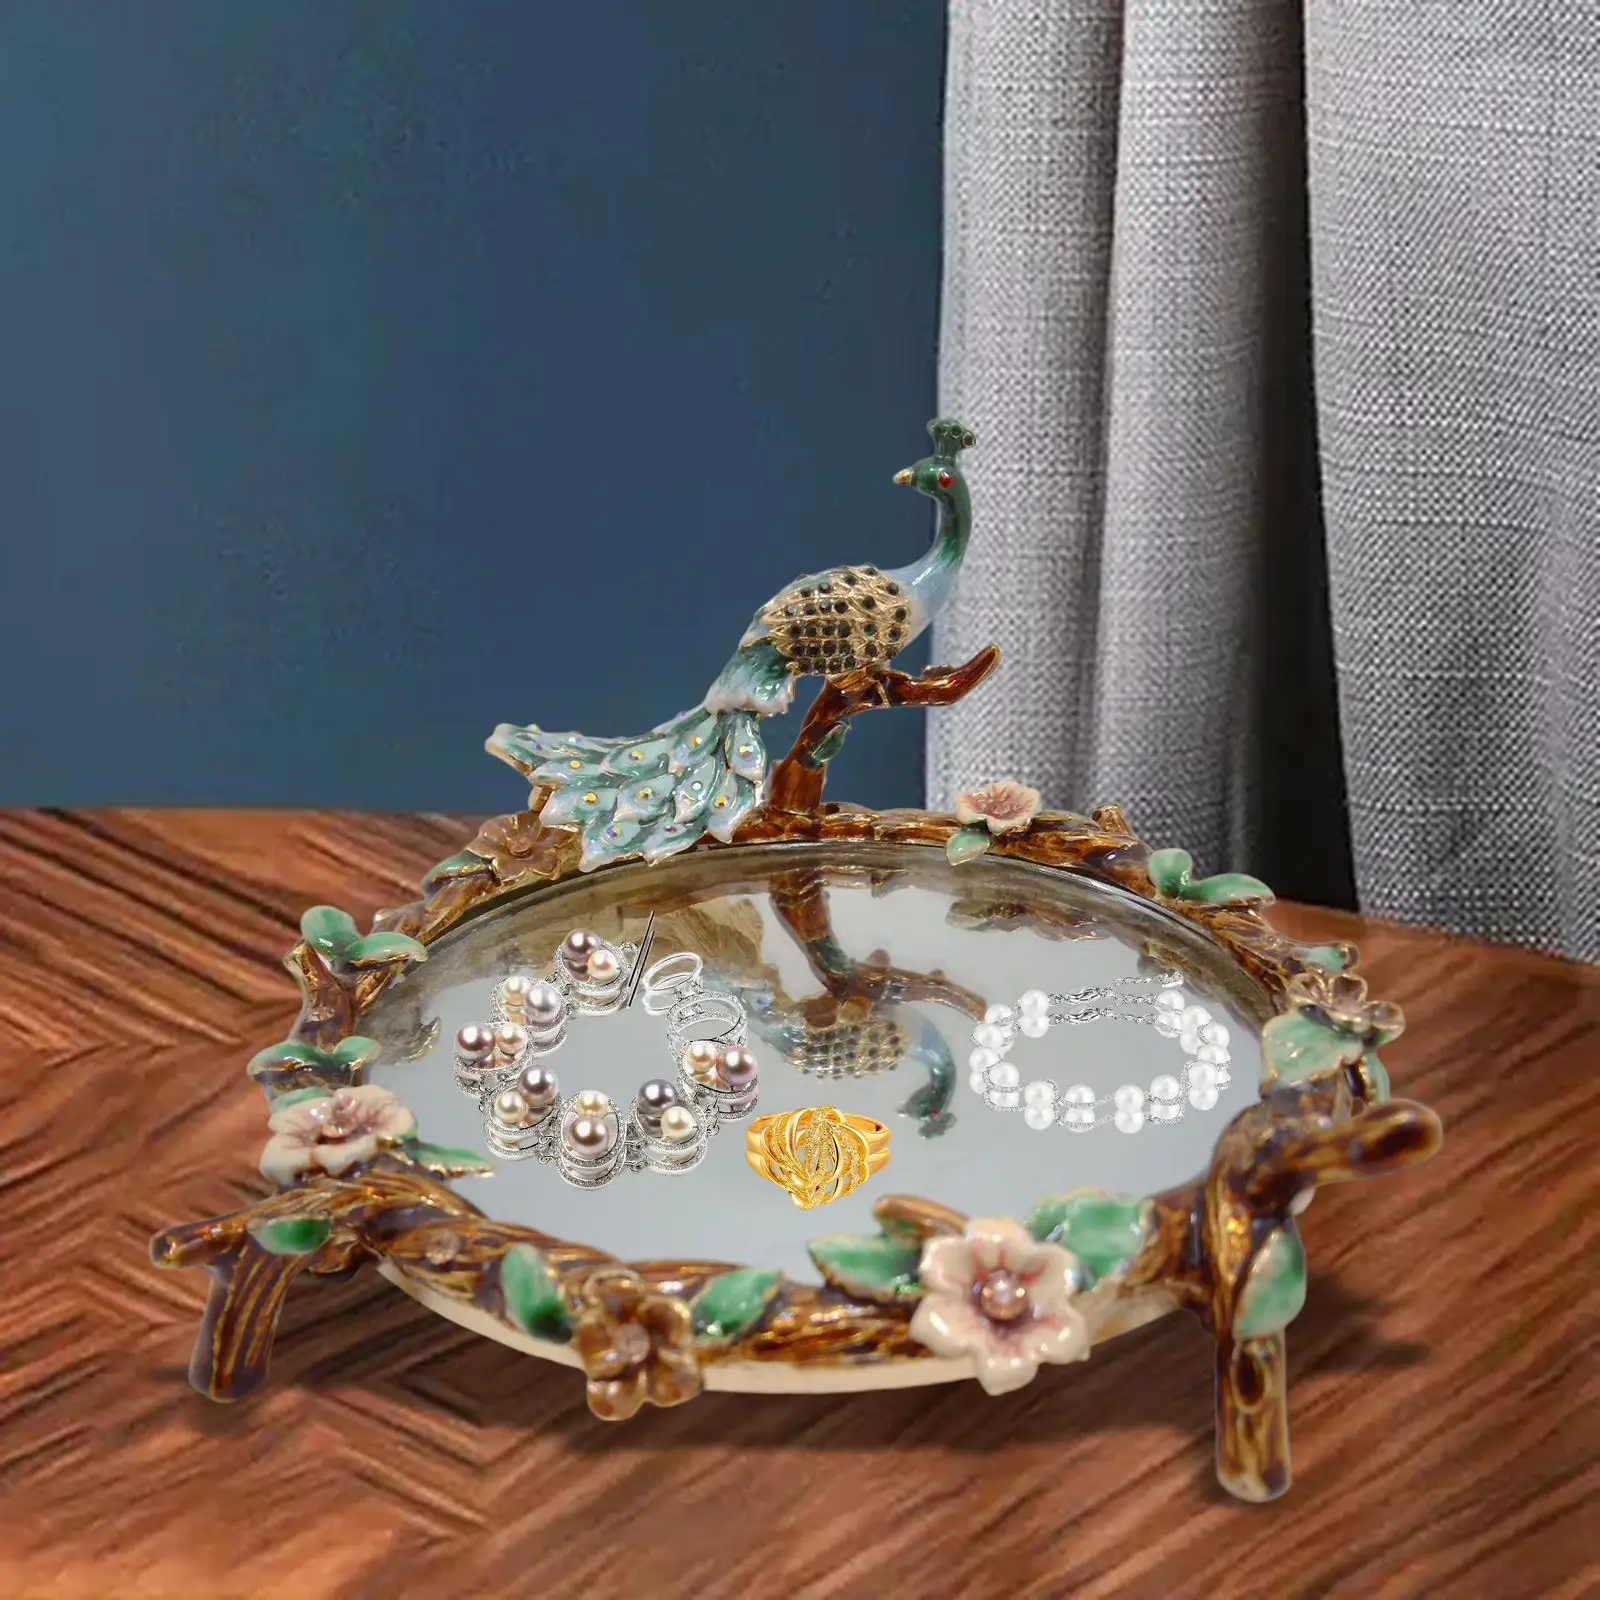 Decorative Mirror Tray Peacock Serving Tray for Countertop Dresser Makeup